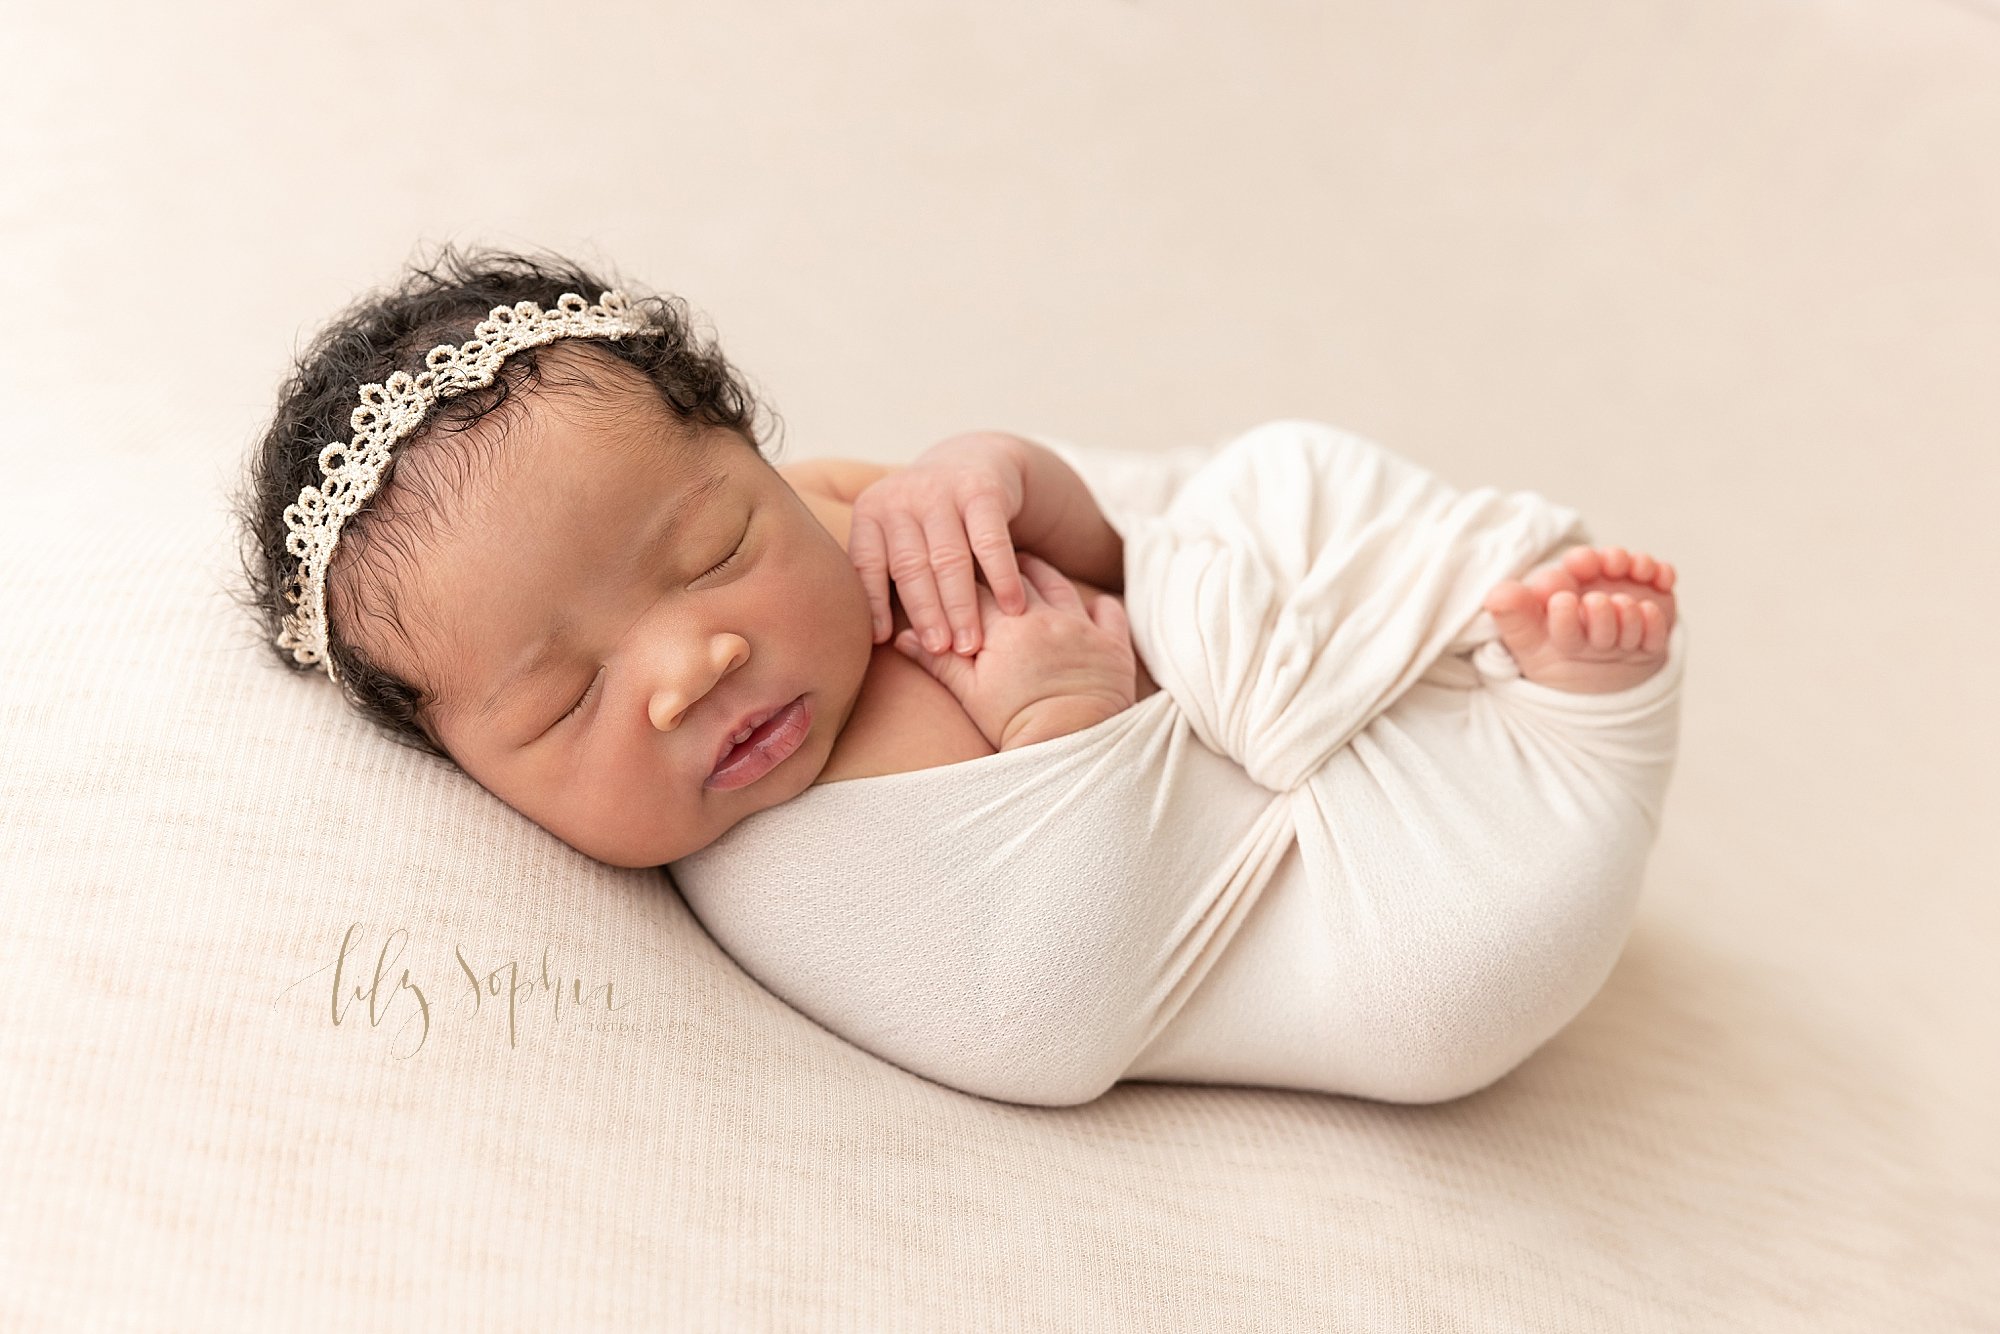  Newborn photo of a peacefully sleeping bundle of joy as an African-American baby girl wearing a delicate crocheted headband on her curly black head lies on her back bundled in a stretchy swaddle with her toes peeking out taken in a photography studi